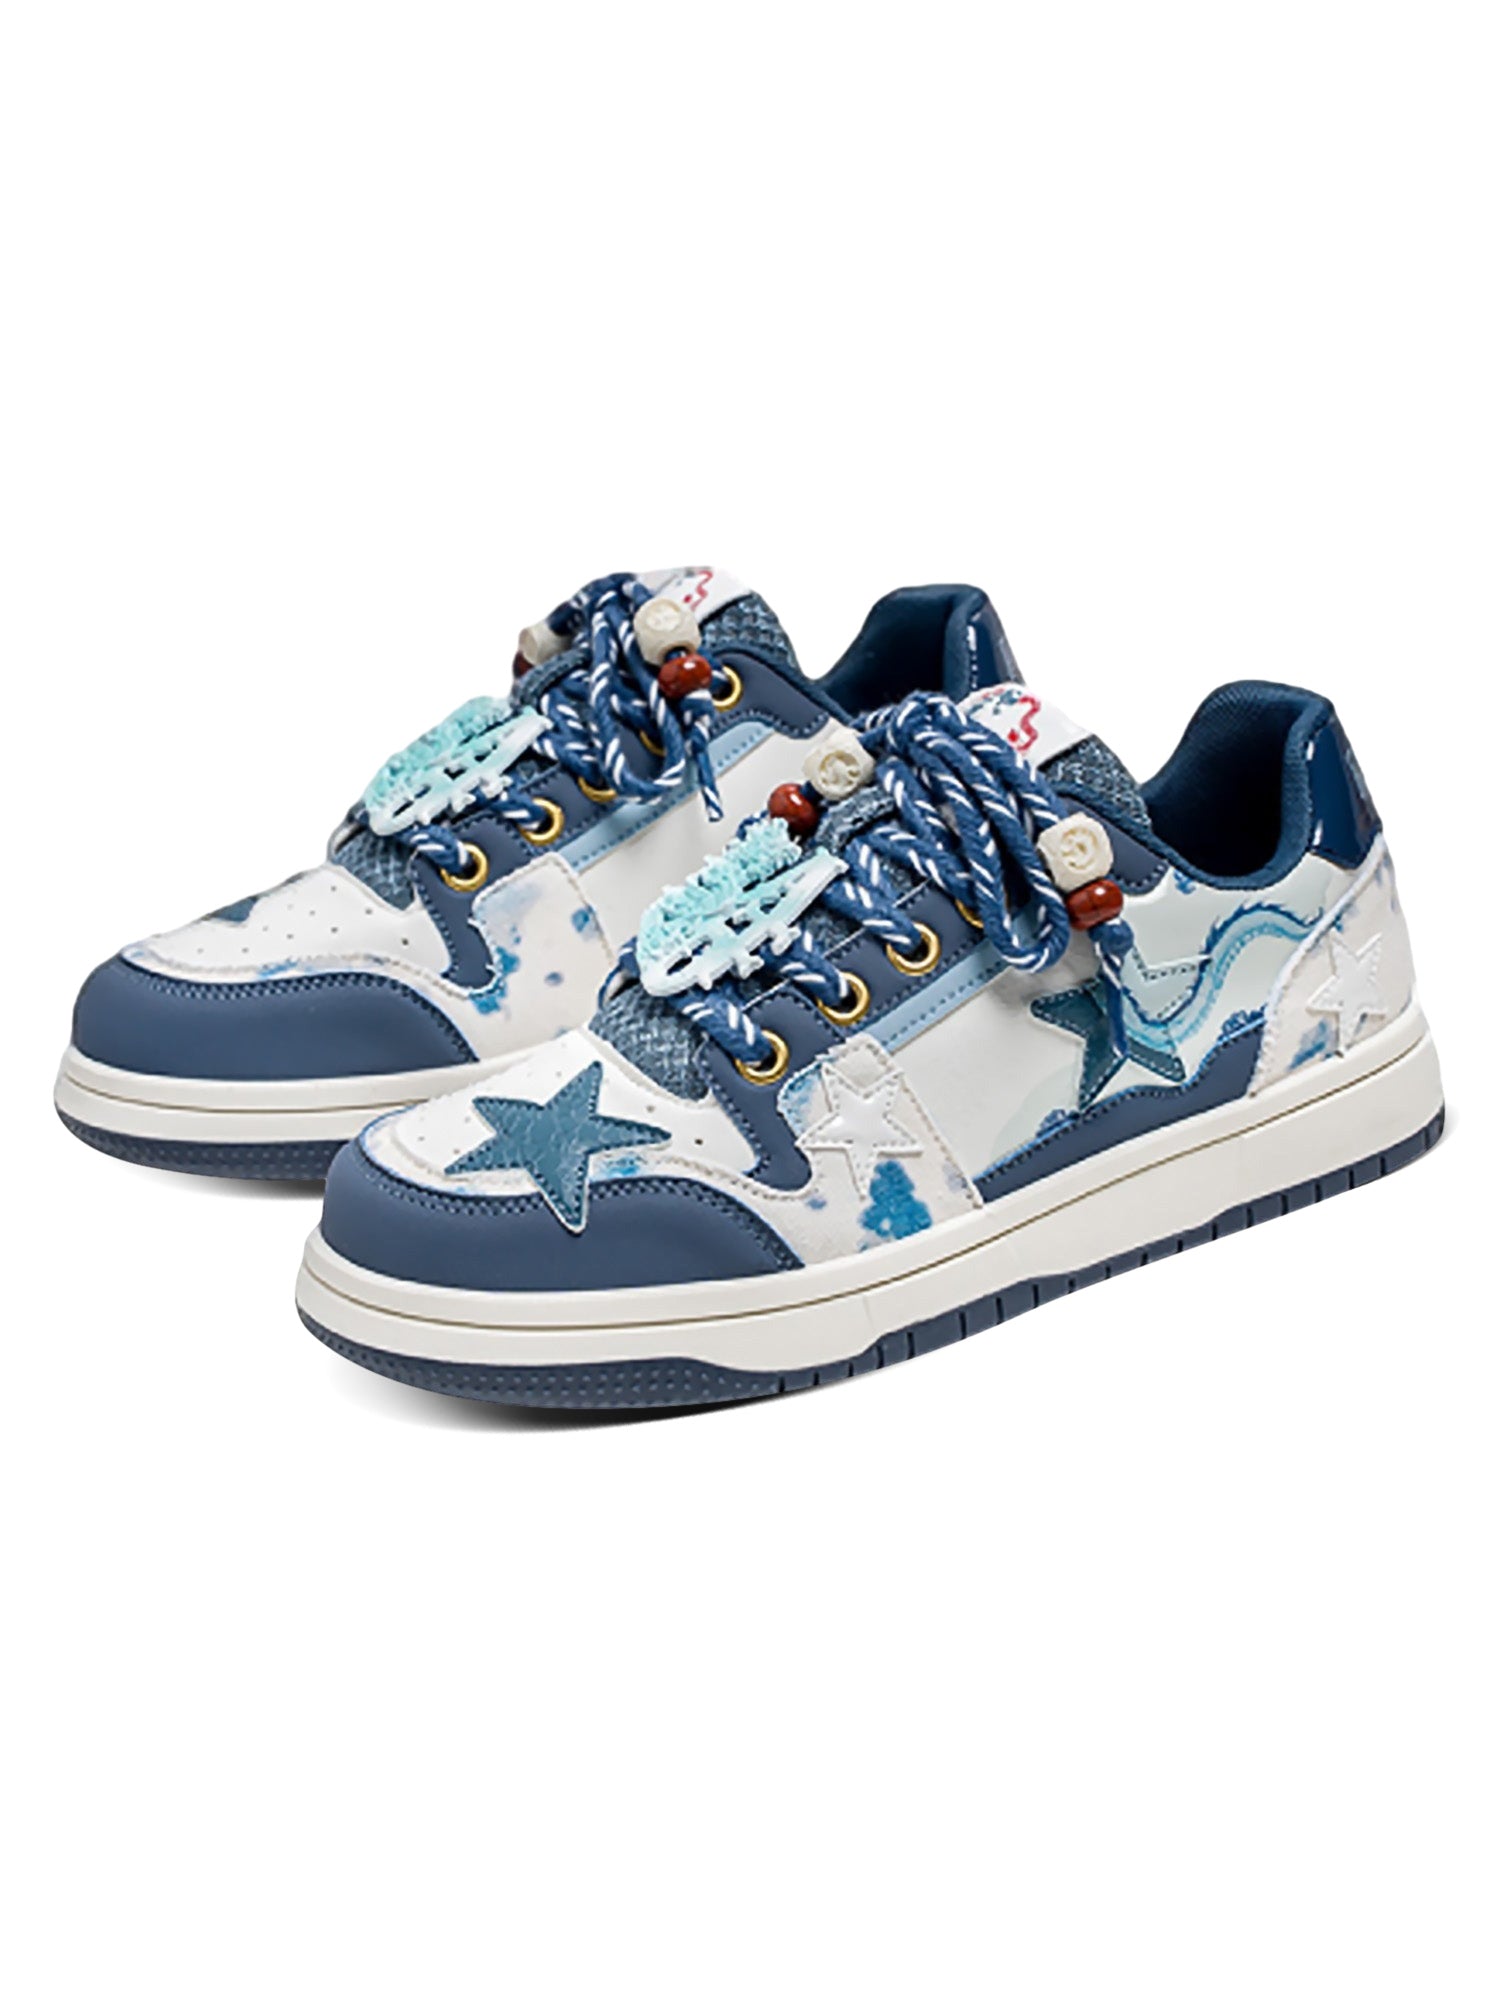 Dragon Limited Blue Star Retro Casual Sneakers